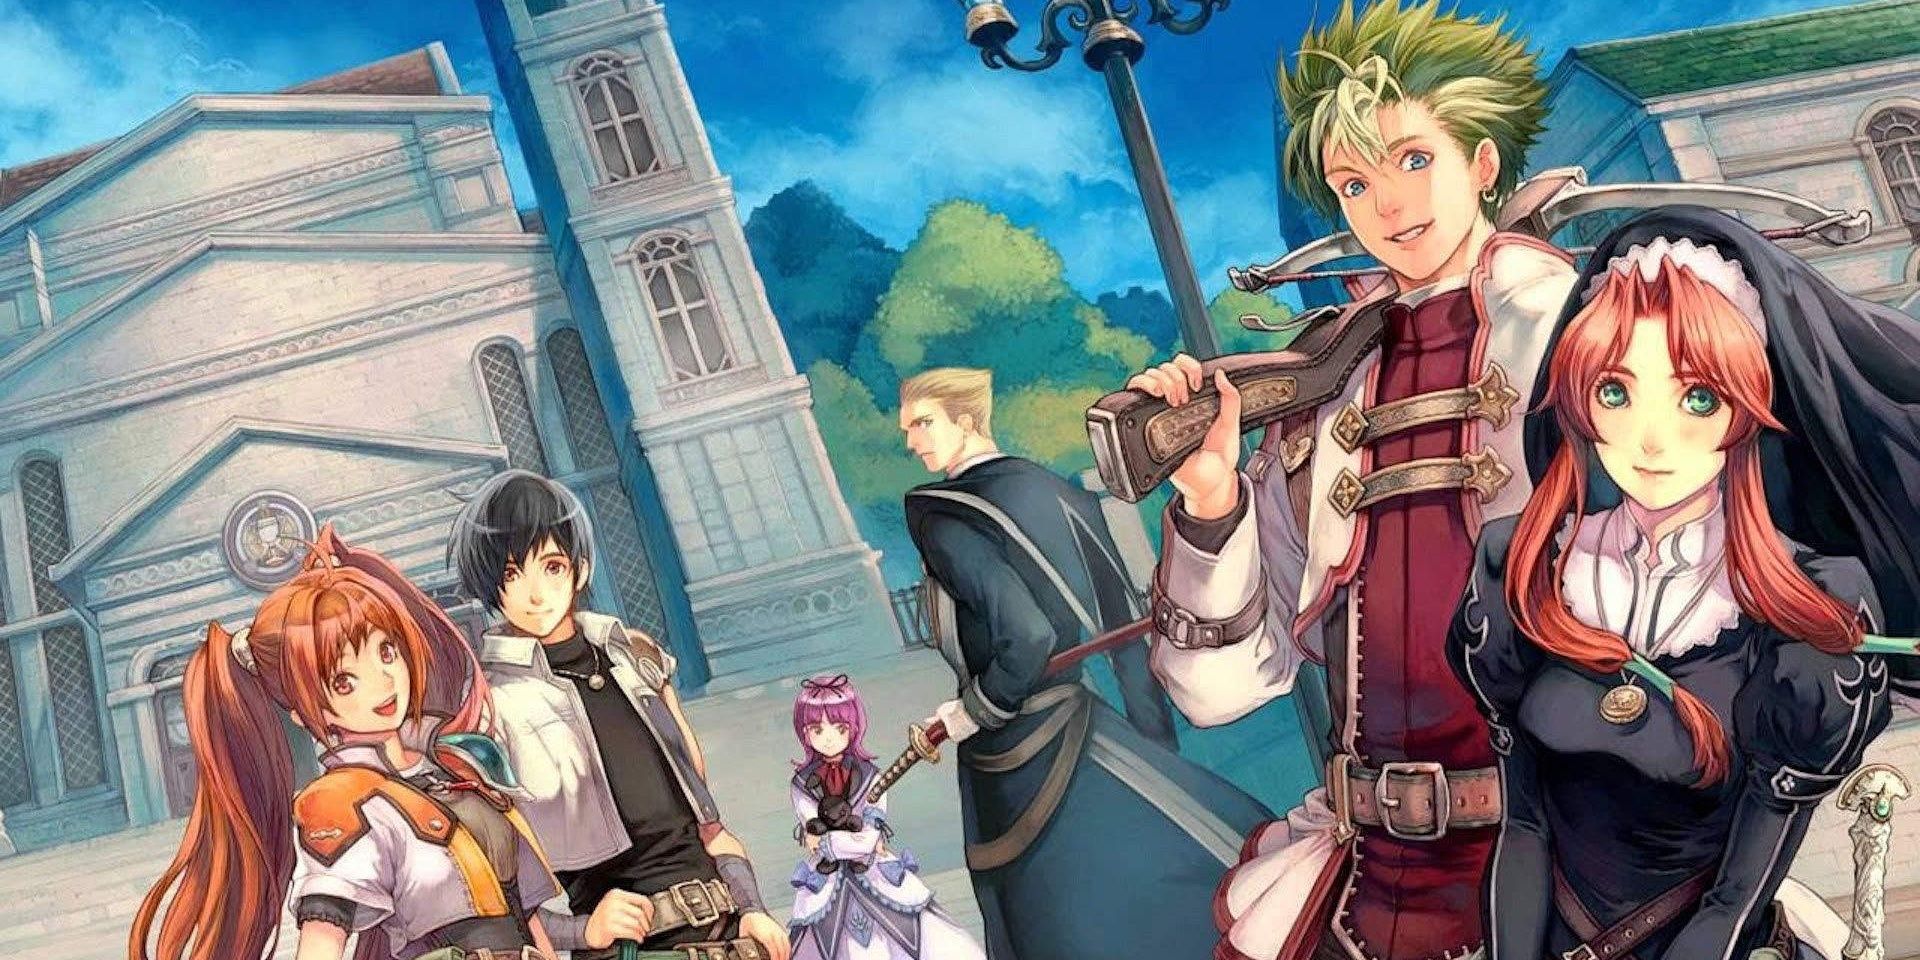 The Legend of Heroes Trails in the Sky has a believable world and deep characters